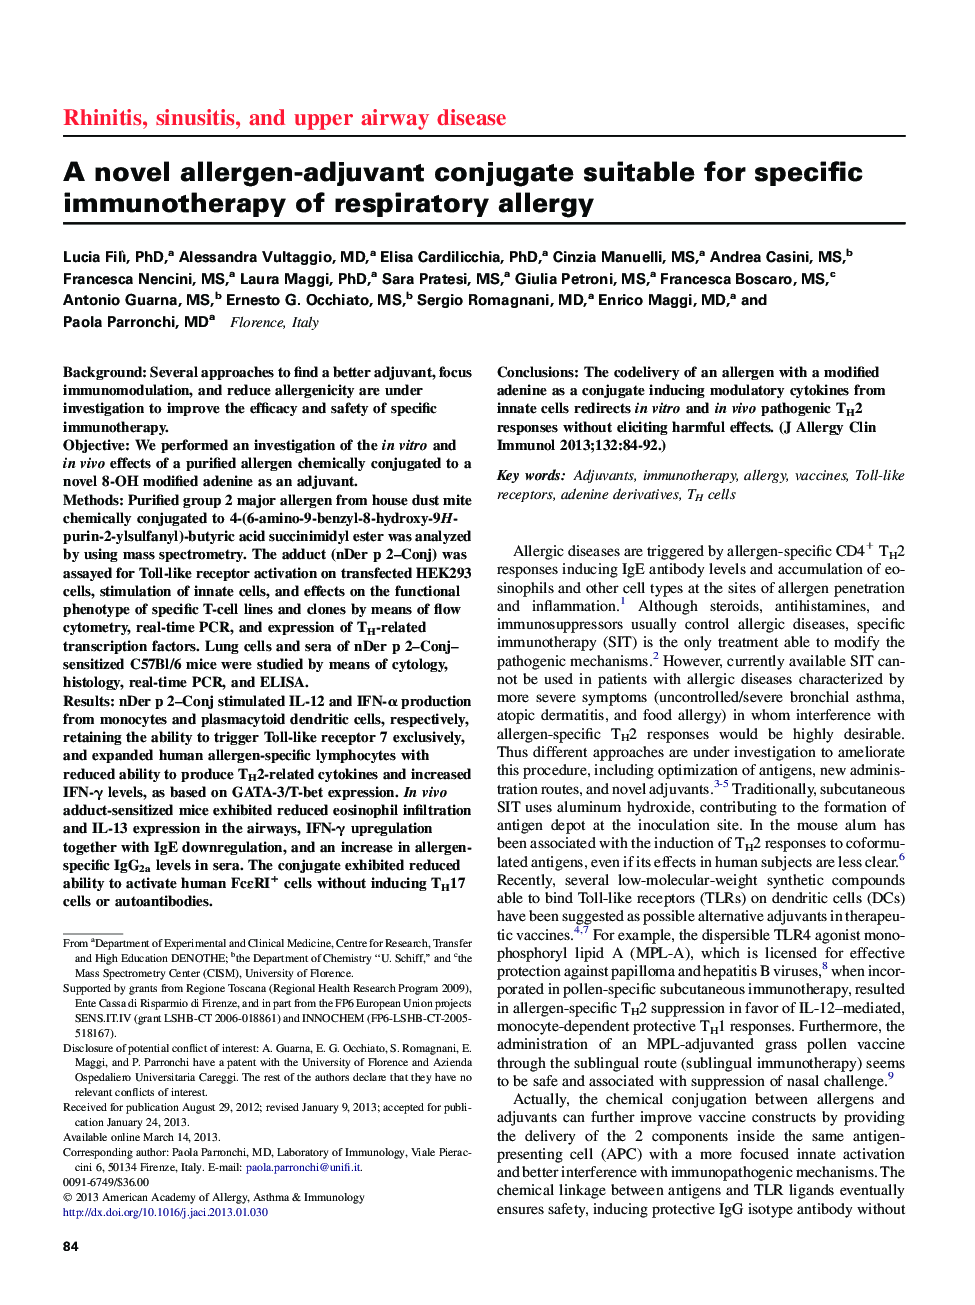 Rhinitis, sinusitis, and upper airway diseaseA novel allergen-adjuvant conjugate suitable for specific immunotherapy of respiratory allergy